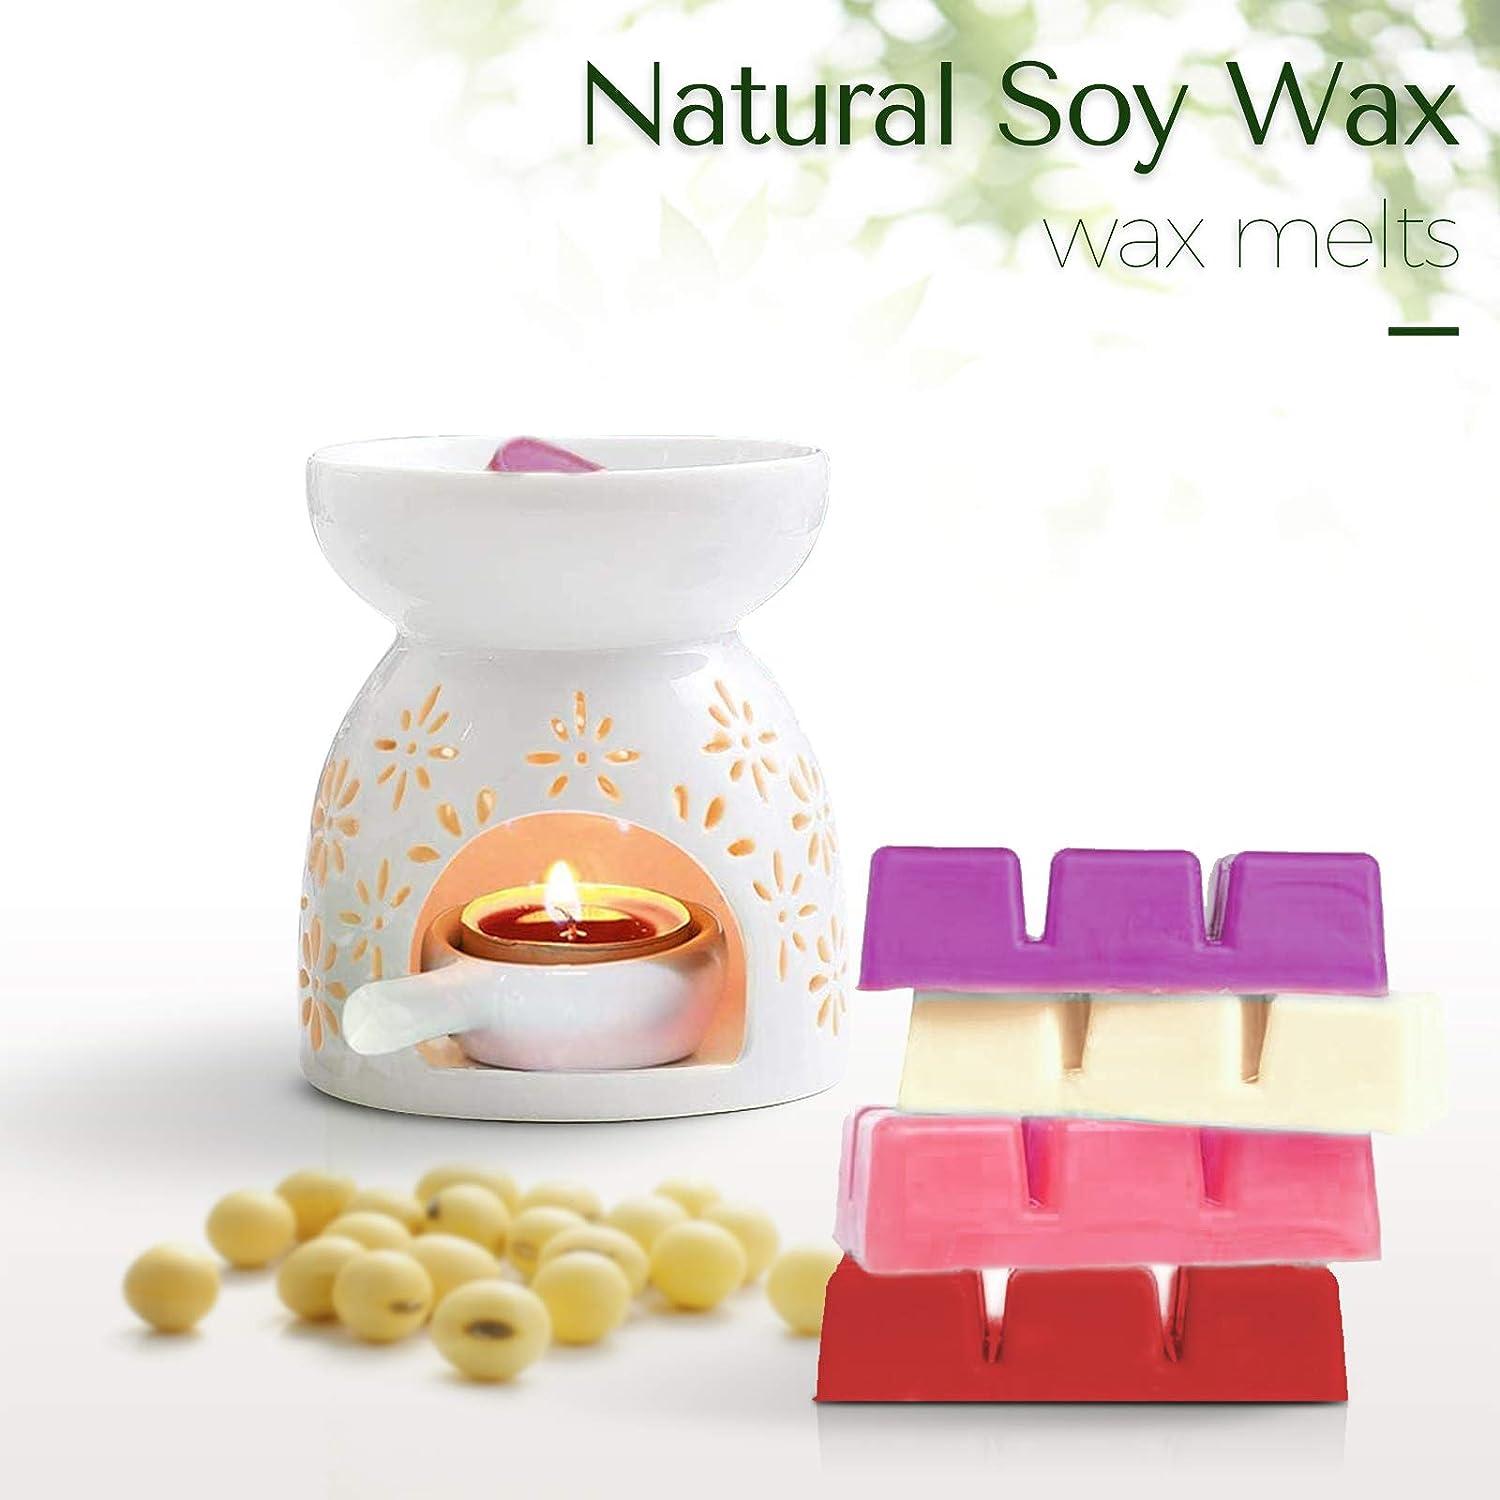 6 Best Wax Melts for a Relaxing Home Ambiance